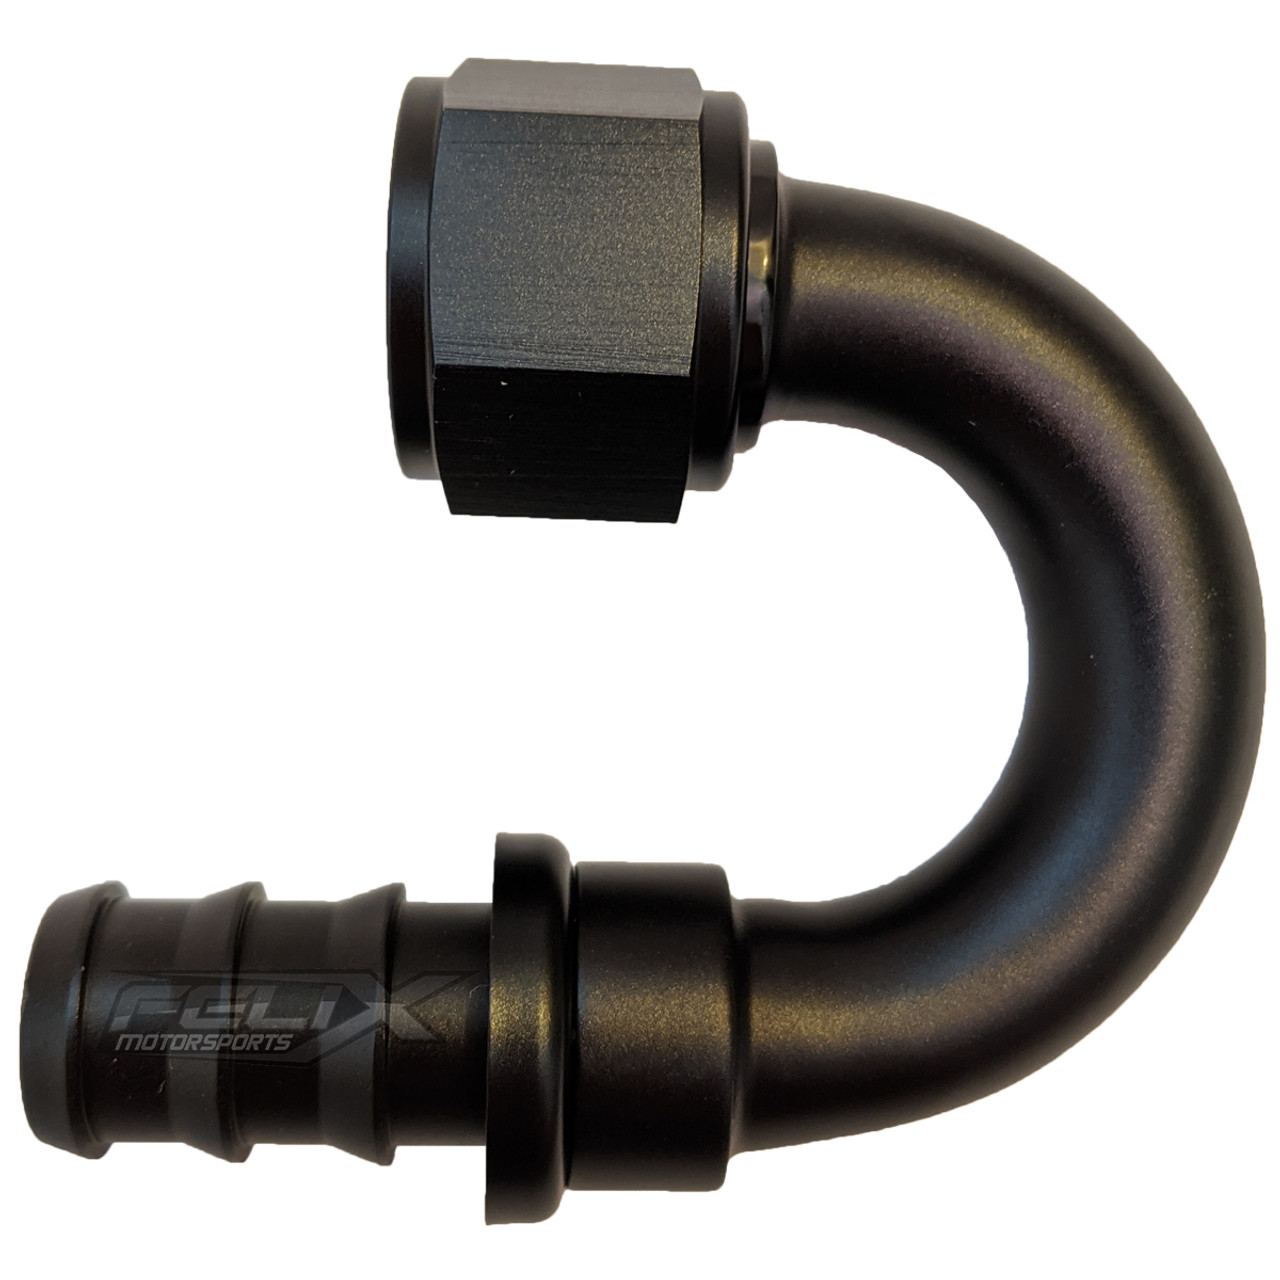 -12 AN Black 180 degree Push-On Hose End Barb Fitting Fuel Line Oil 12AN AN12 3/4